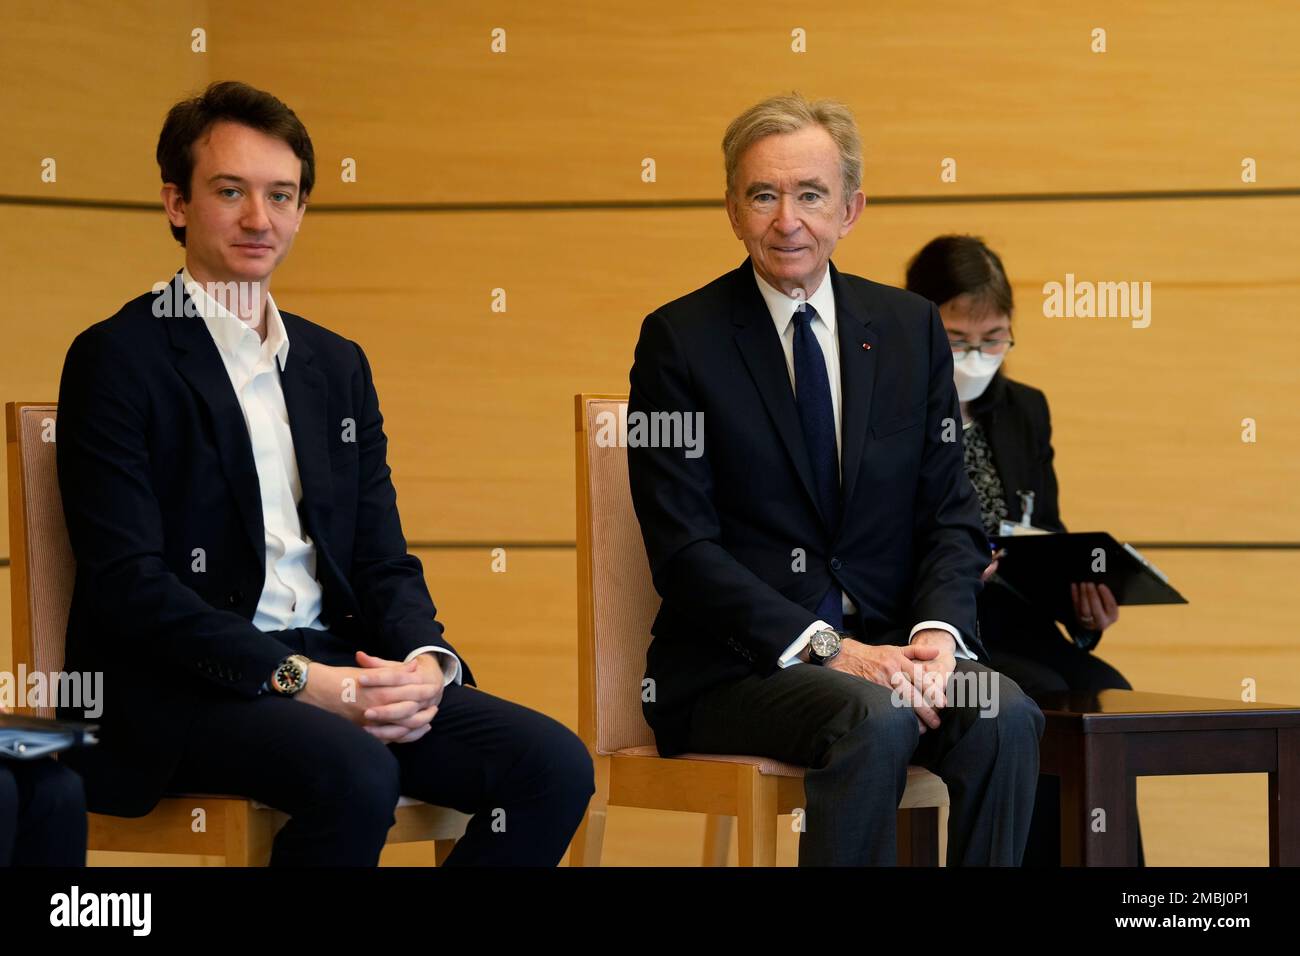 Bernard Arnault's Son Takes Over at TAG Heuer